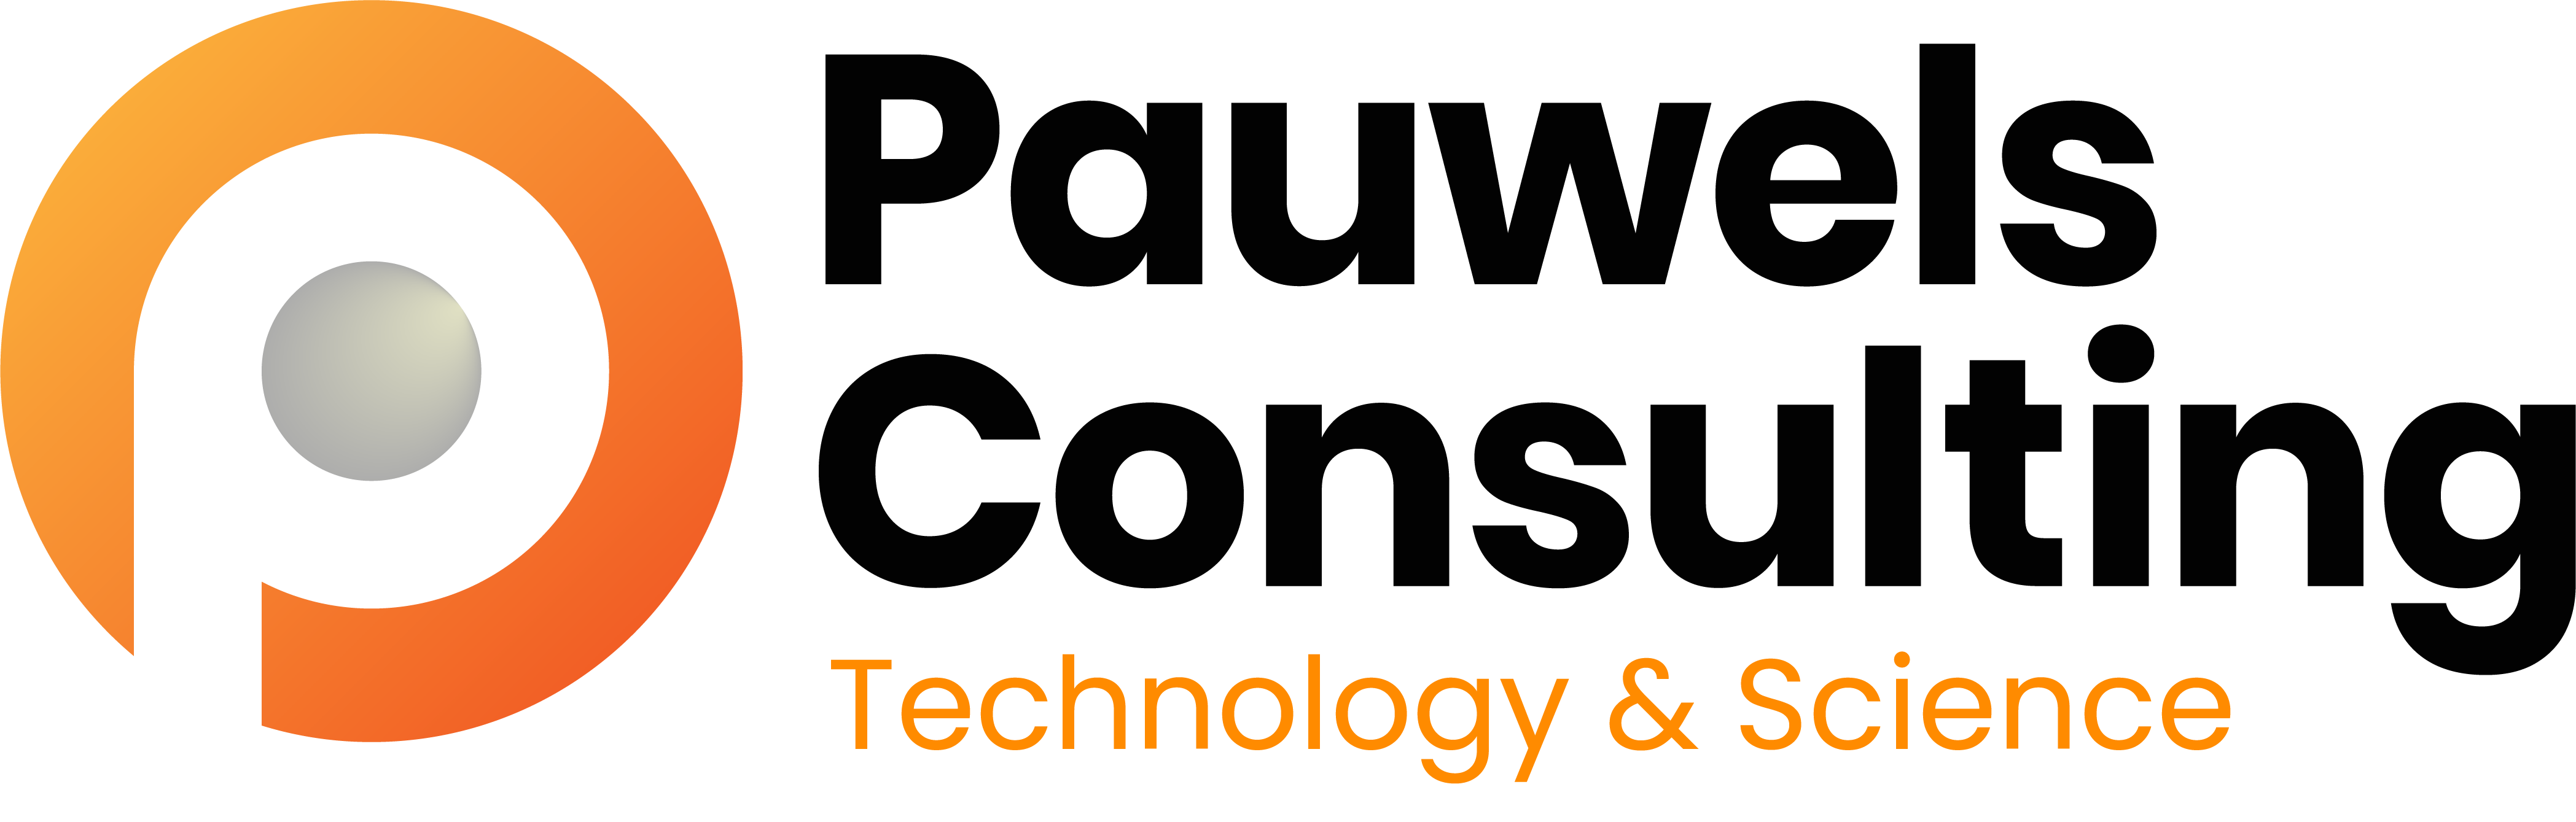 Pauwels_Consulting_logo-update-baseline